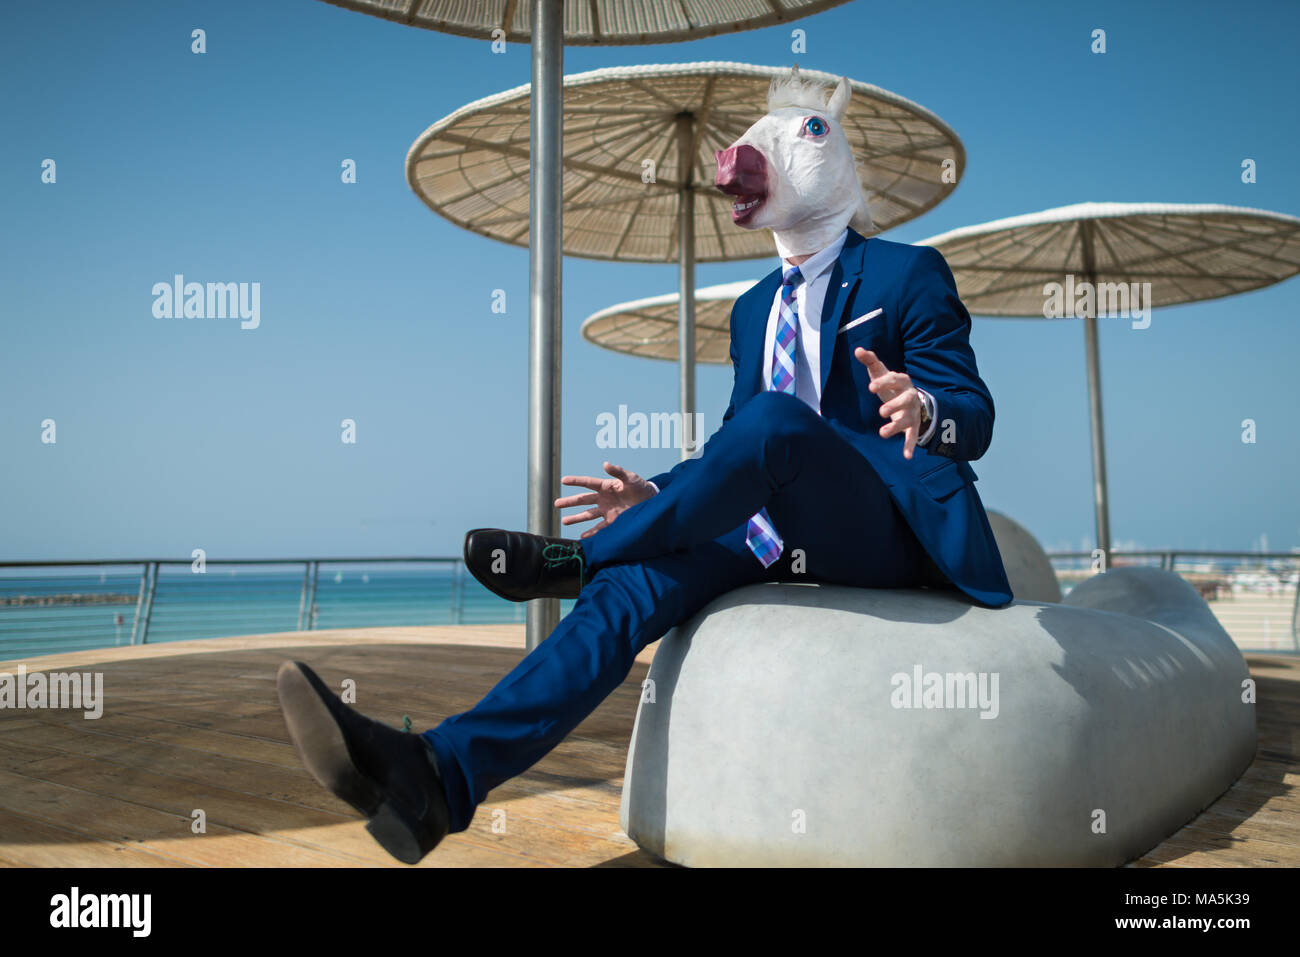 Young manager in suit under umbrellas spreads his hands. Unusual manager in comical mask is surprised. Funny unicorn sits at city promenade Stock Photo